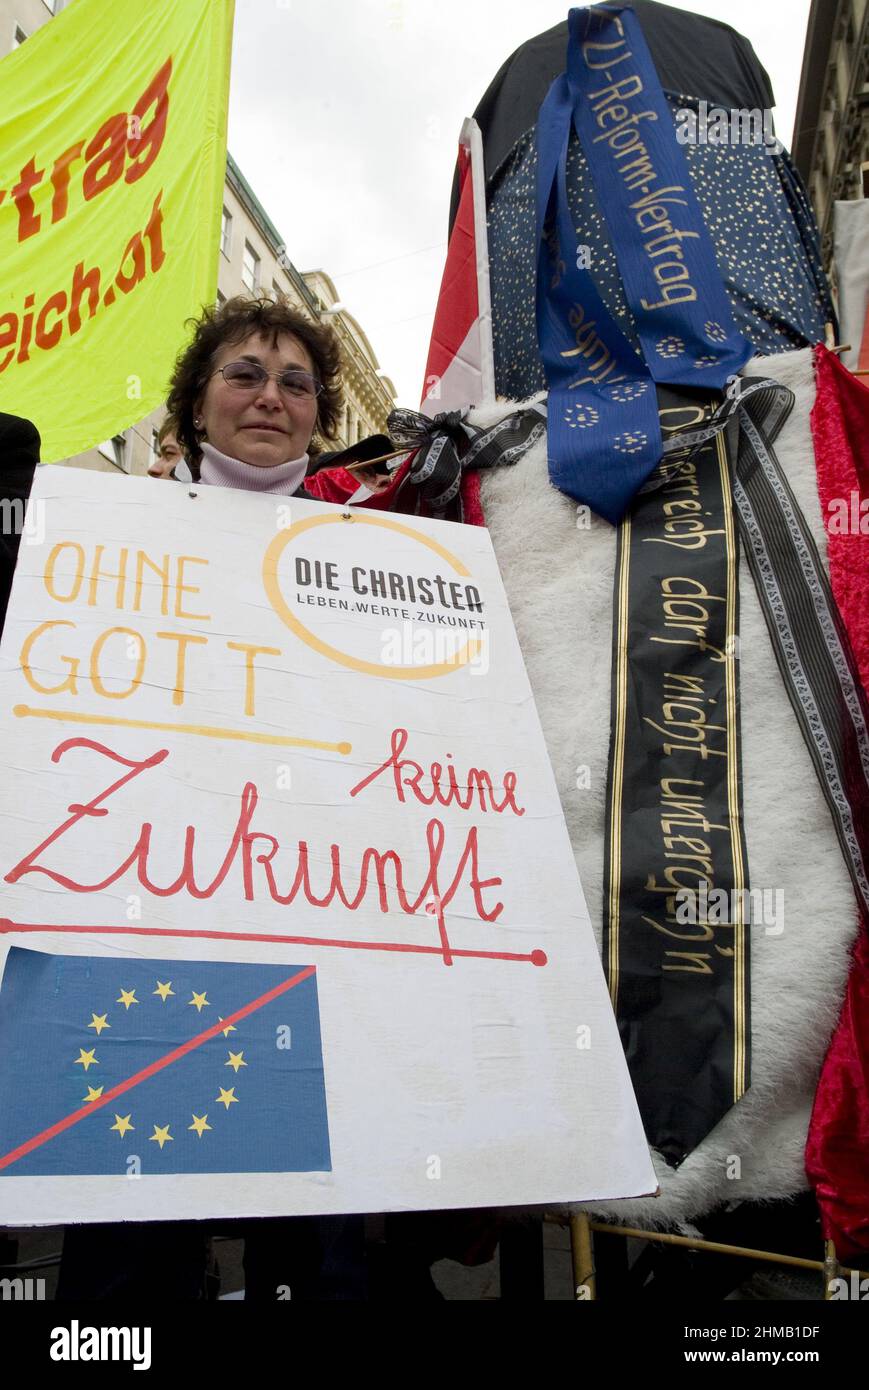 Vienna, Austria. March 23, 2008. Demonstration for referendum against Lisbon Treaty in Vienna. Inscription "Without God no future" Stock Photo